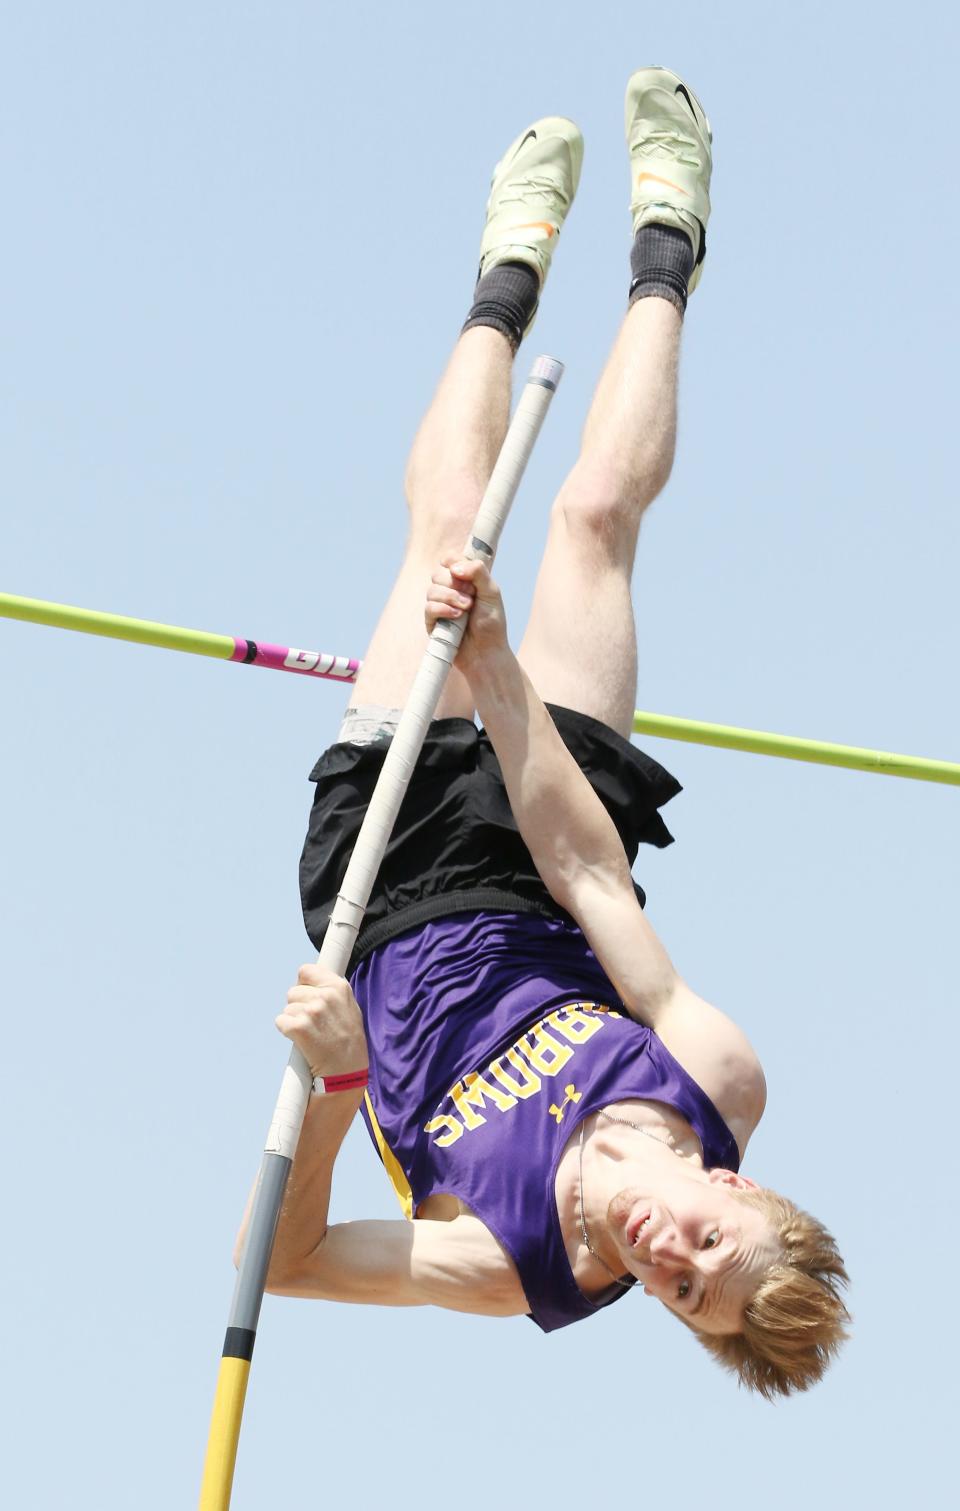 Owen Spartz of Watertown repeated as the Class AA boys' pole vault champion during the South Dakota State High School Track and Field Championships that concluded on Saturday, May 27, 2023 in Sioux Falls.